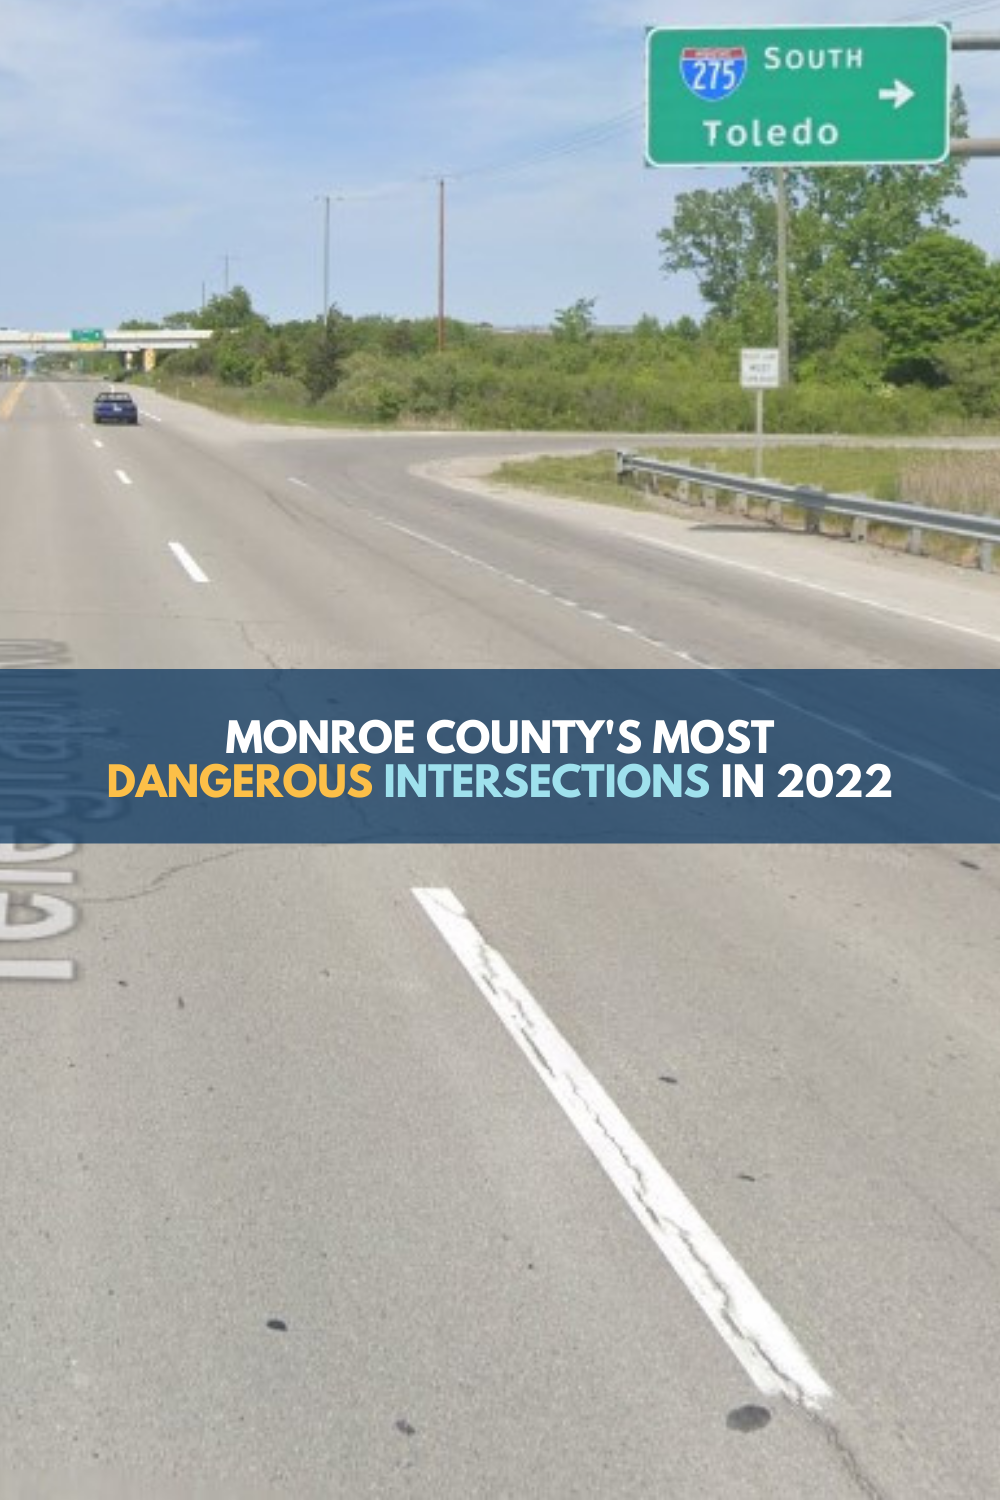 Monroe County’s Most Dangerous Intersections in 2022